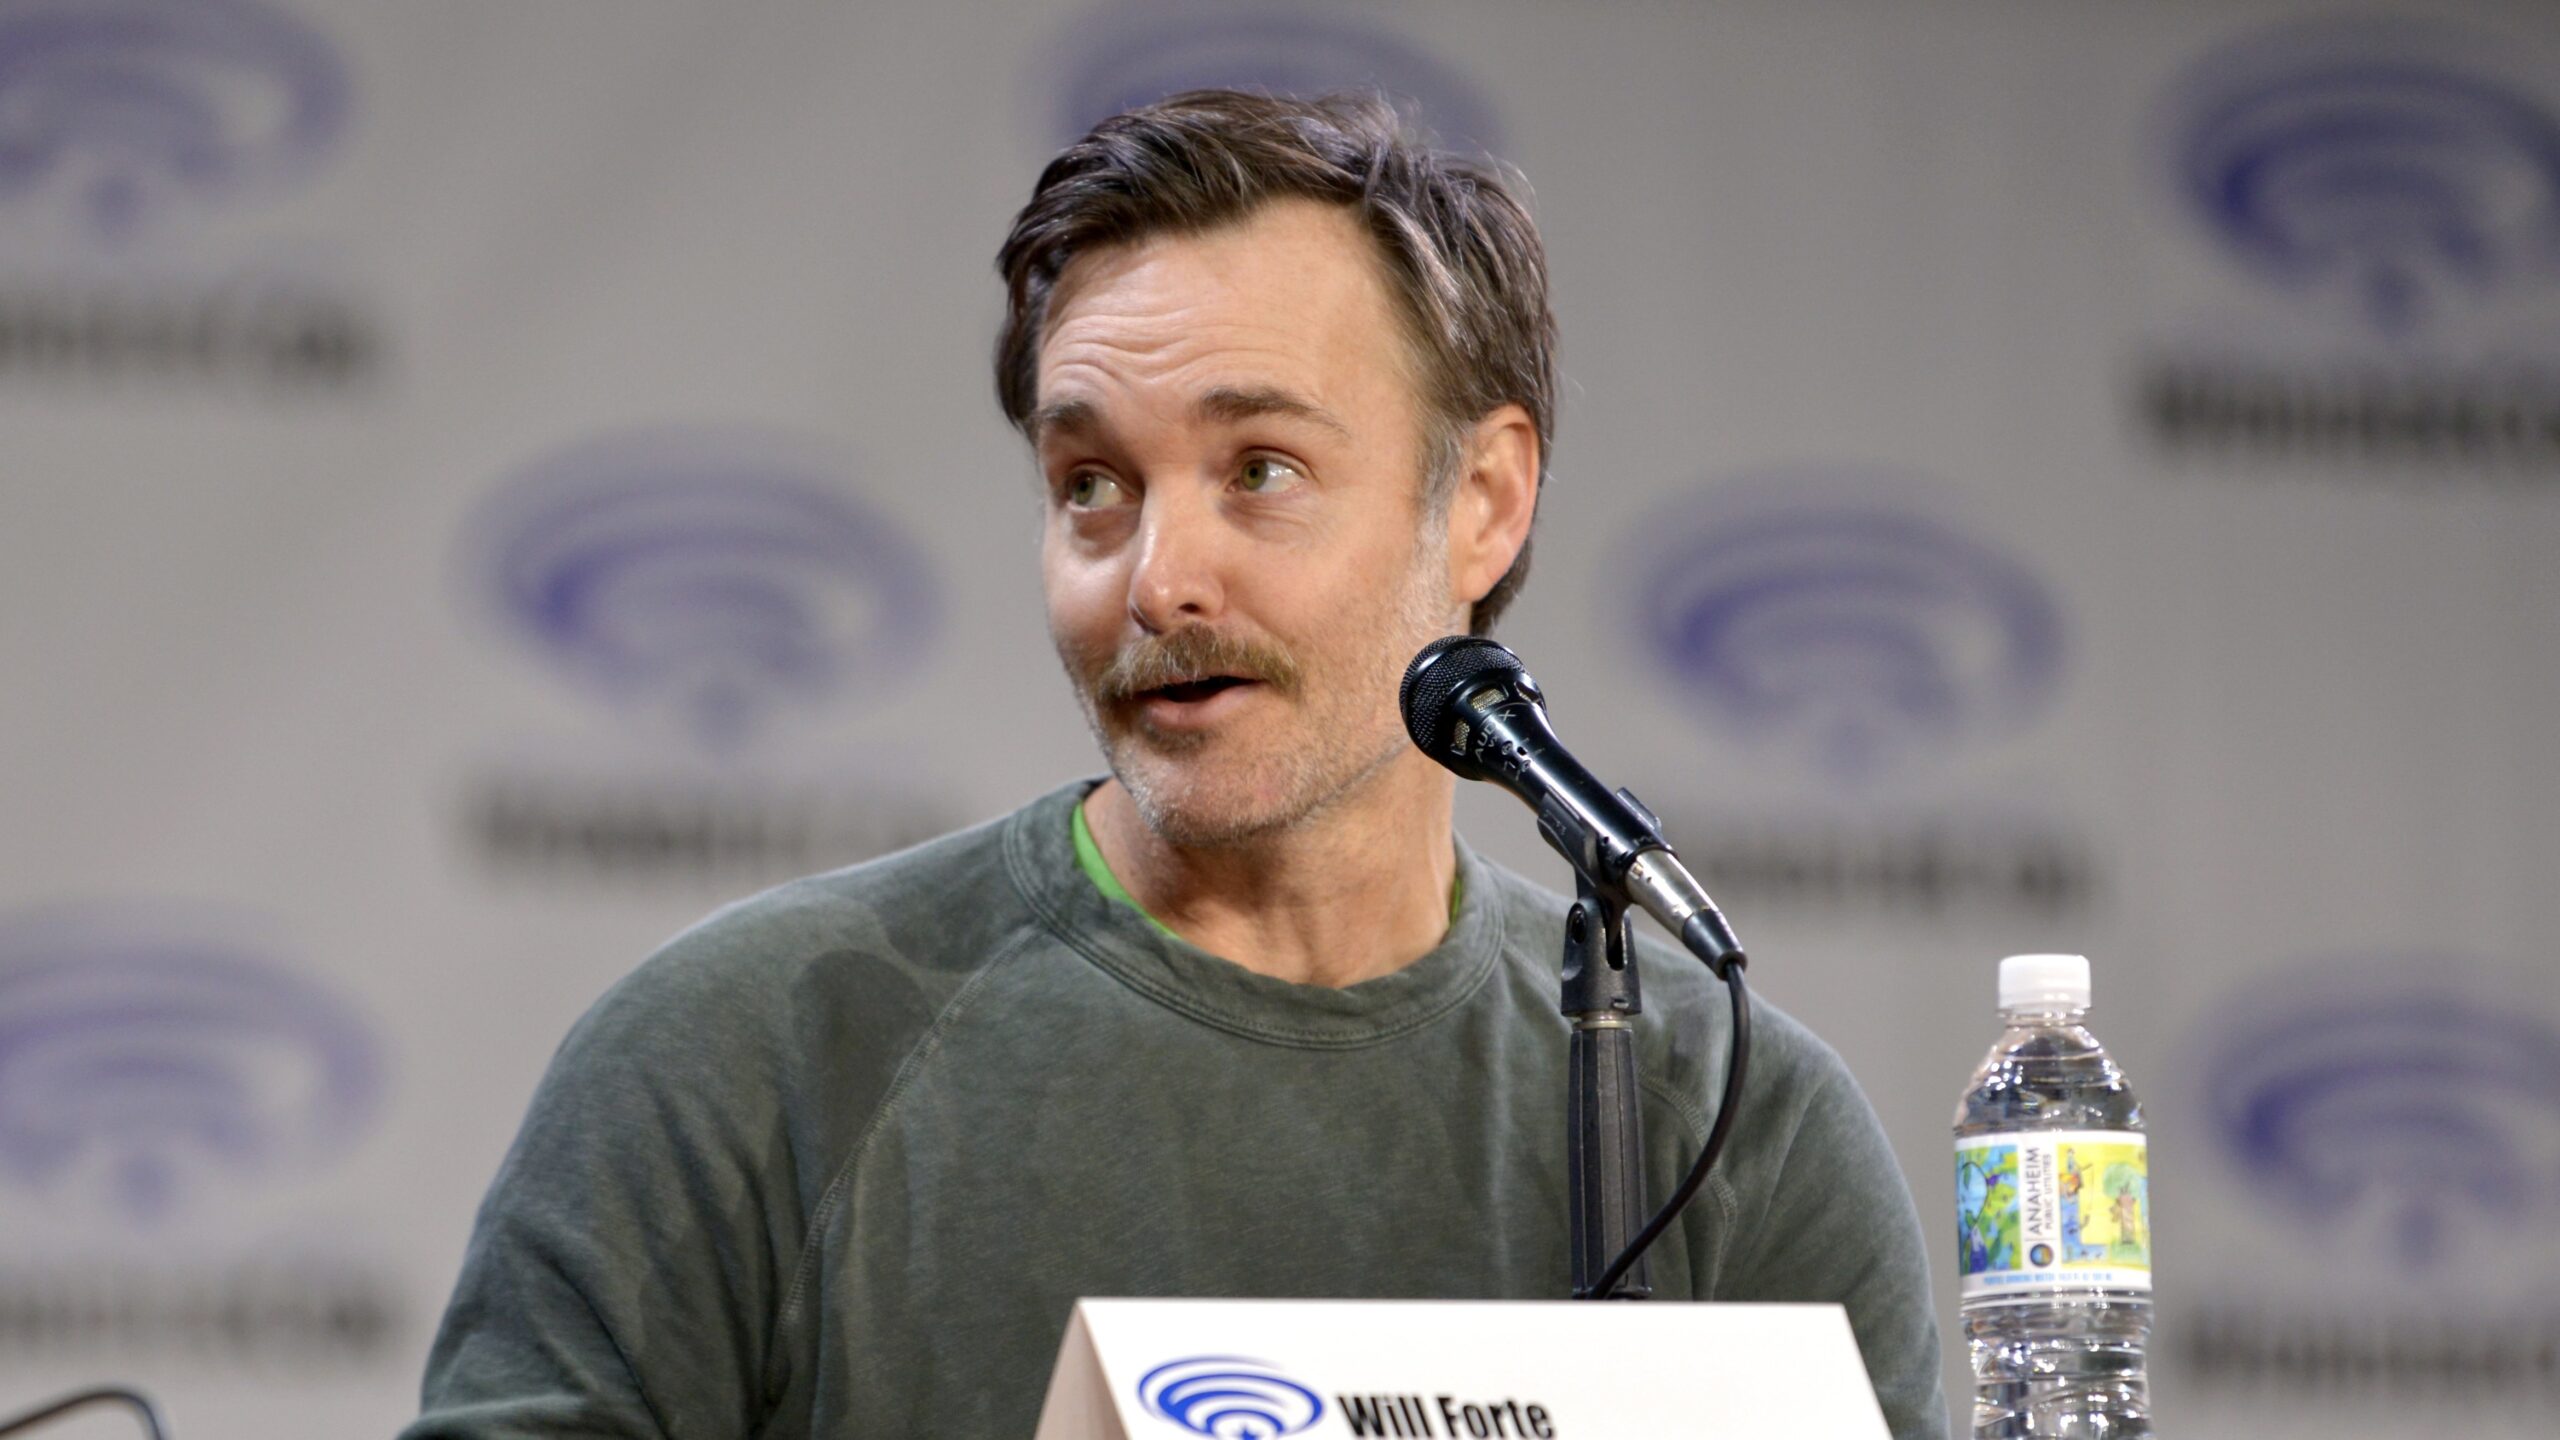 Will Forte speaking at a panel.